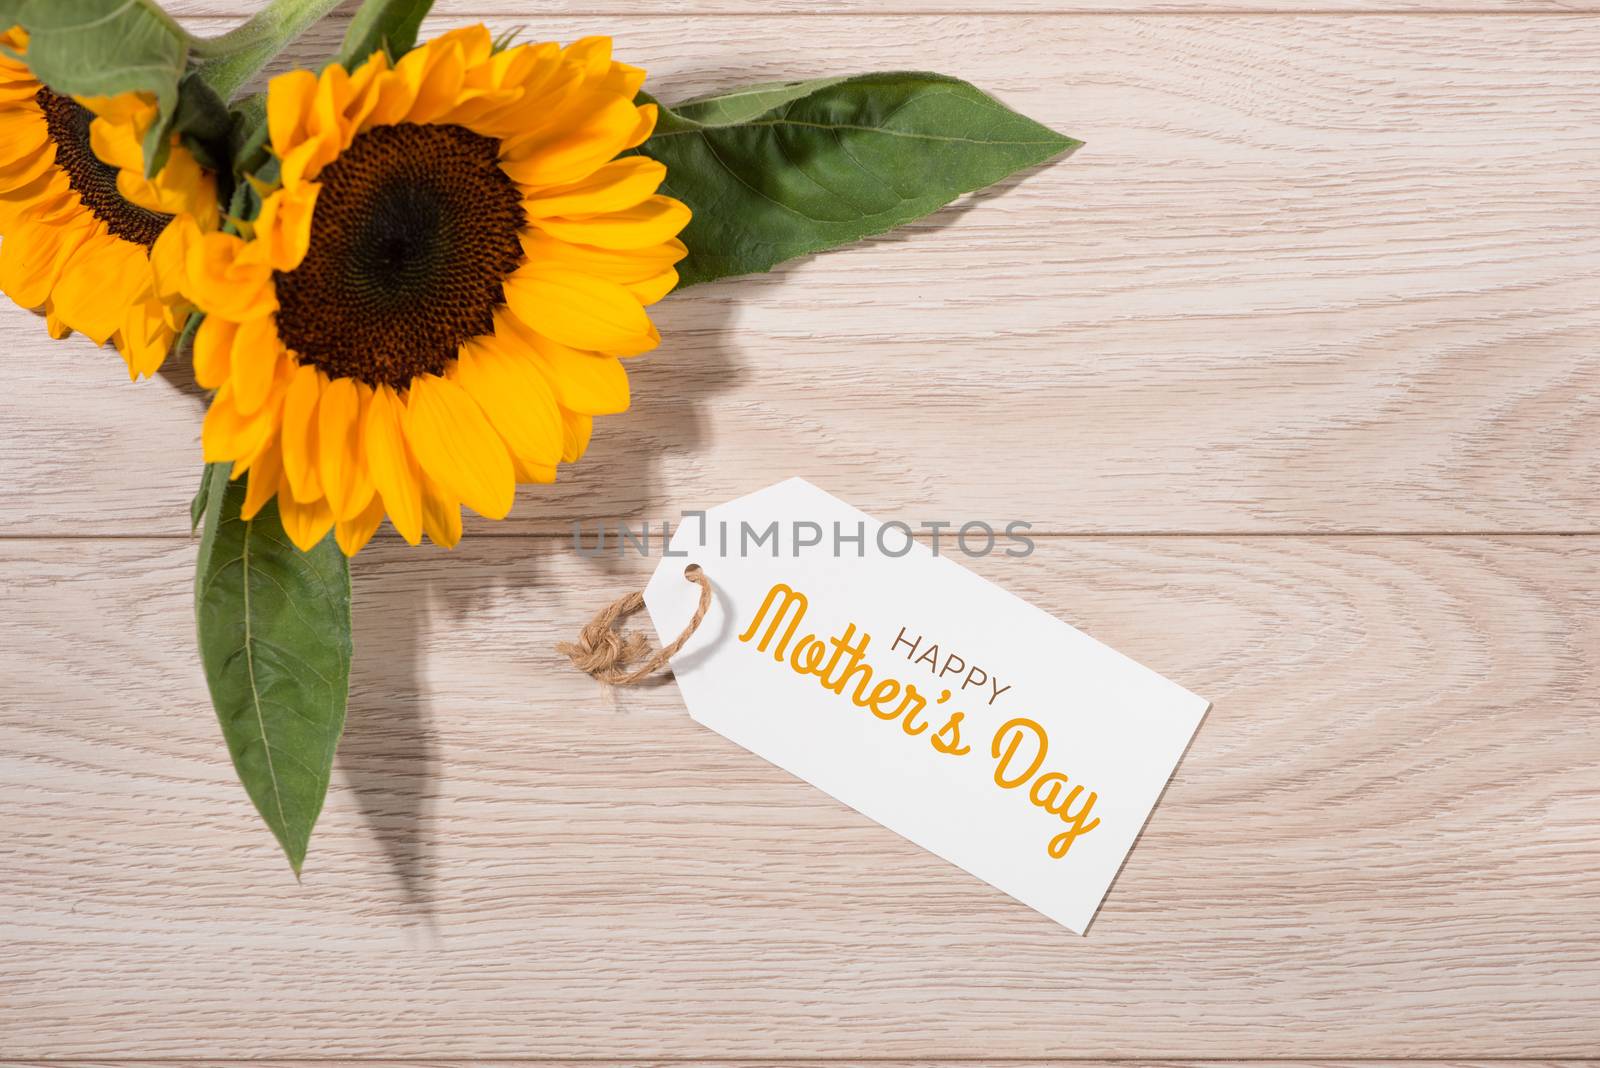 Blank white tag paper with color flowers on wooden background. T by makidotvn